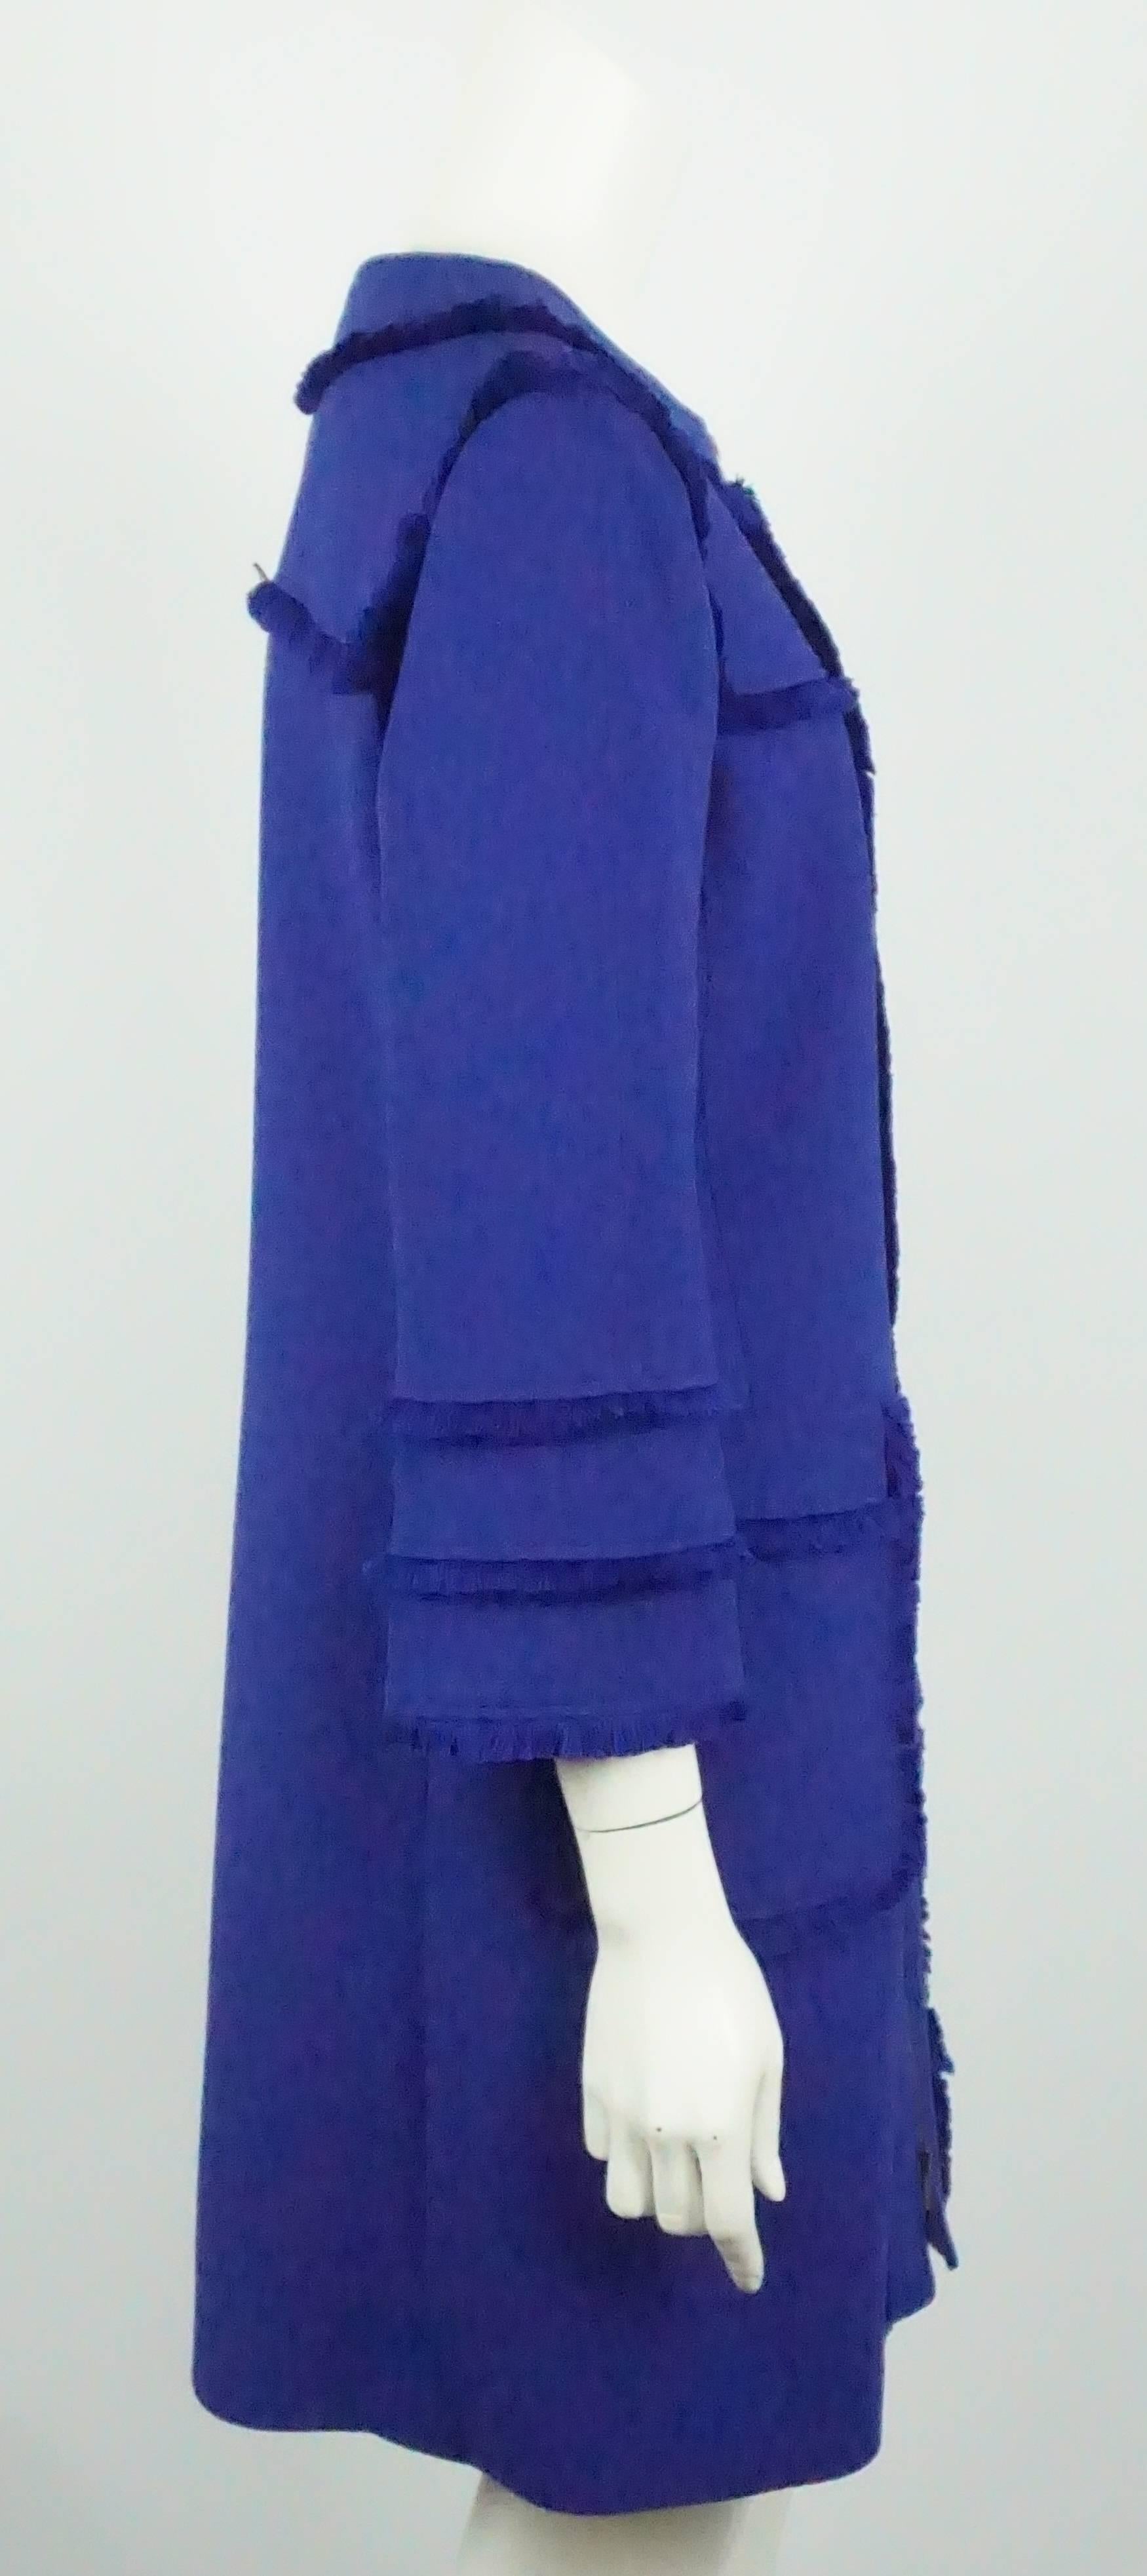 Andrew GN Royal Blue Wool Coat with Fringe - 42  This coat has a beautiful royal blue color in wool. It has a front zip, 2 front pockets trimmed in fringe, bracelet sleeve and lined in silk. The coat is in excellent condition, only worn